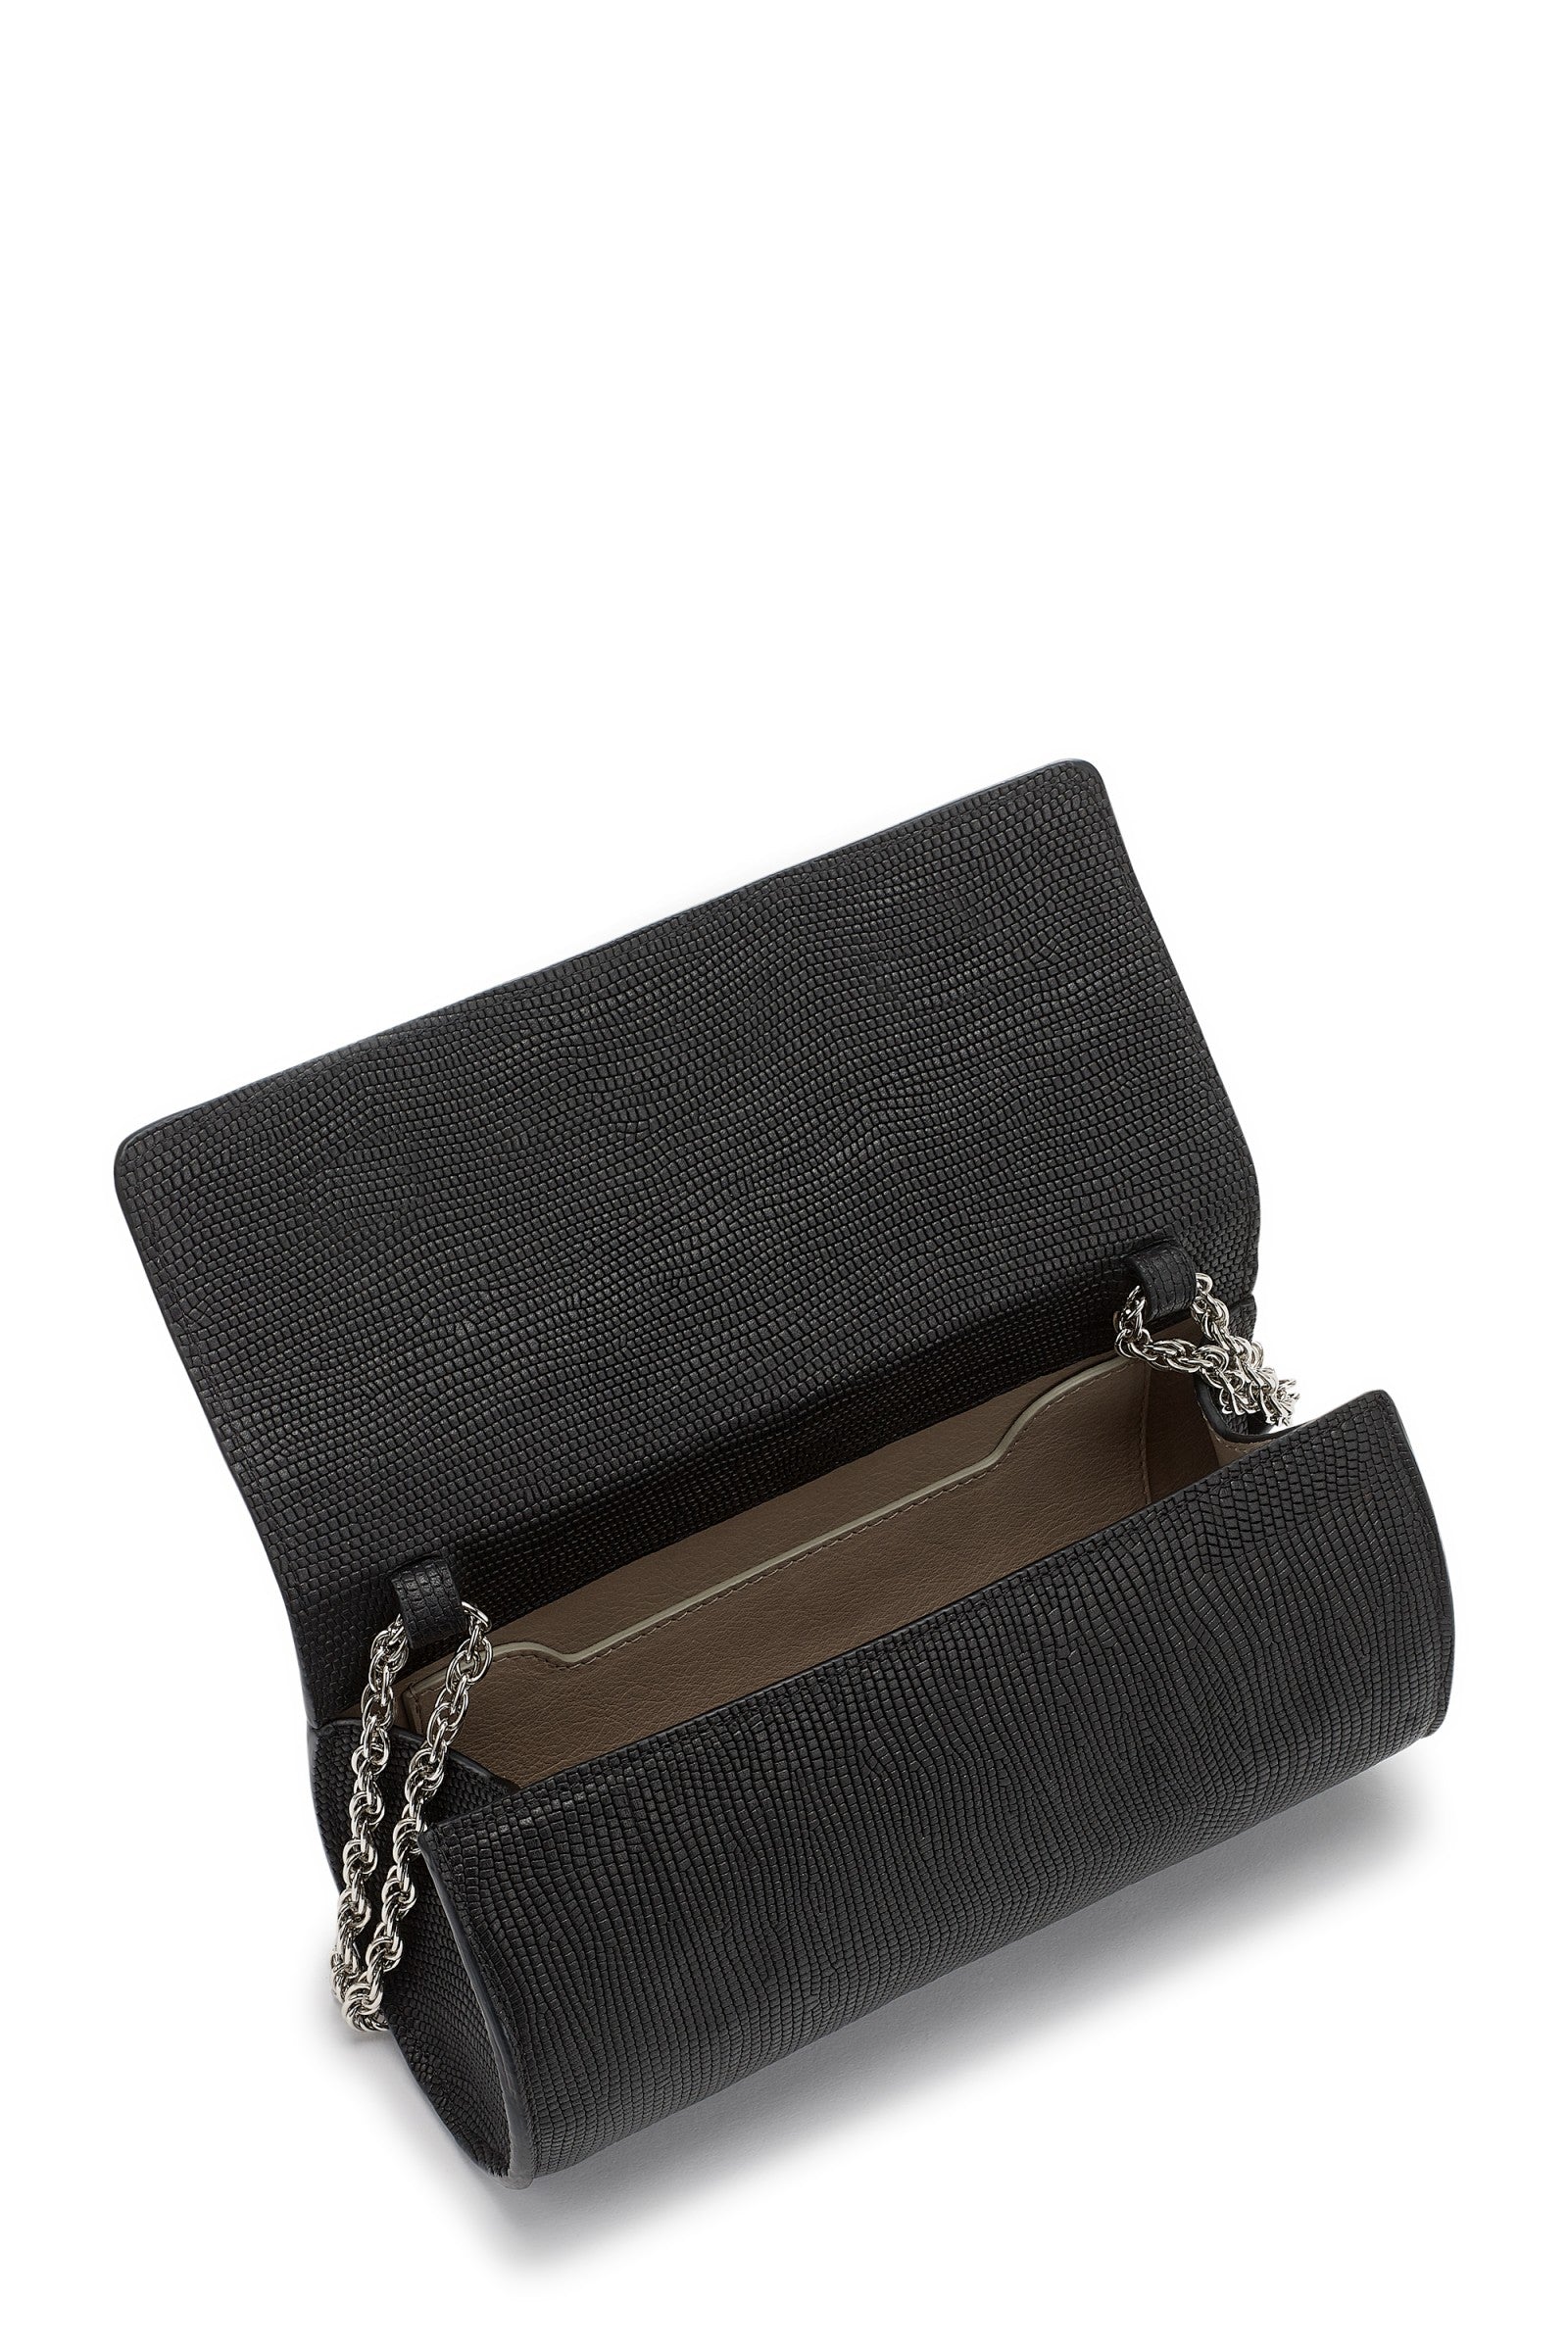 Kinsely BLACK Leather Roll Clutch